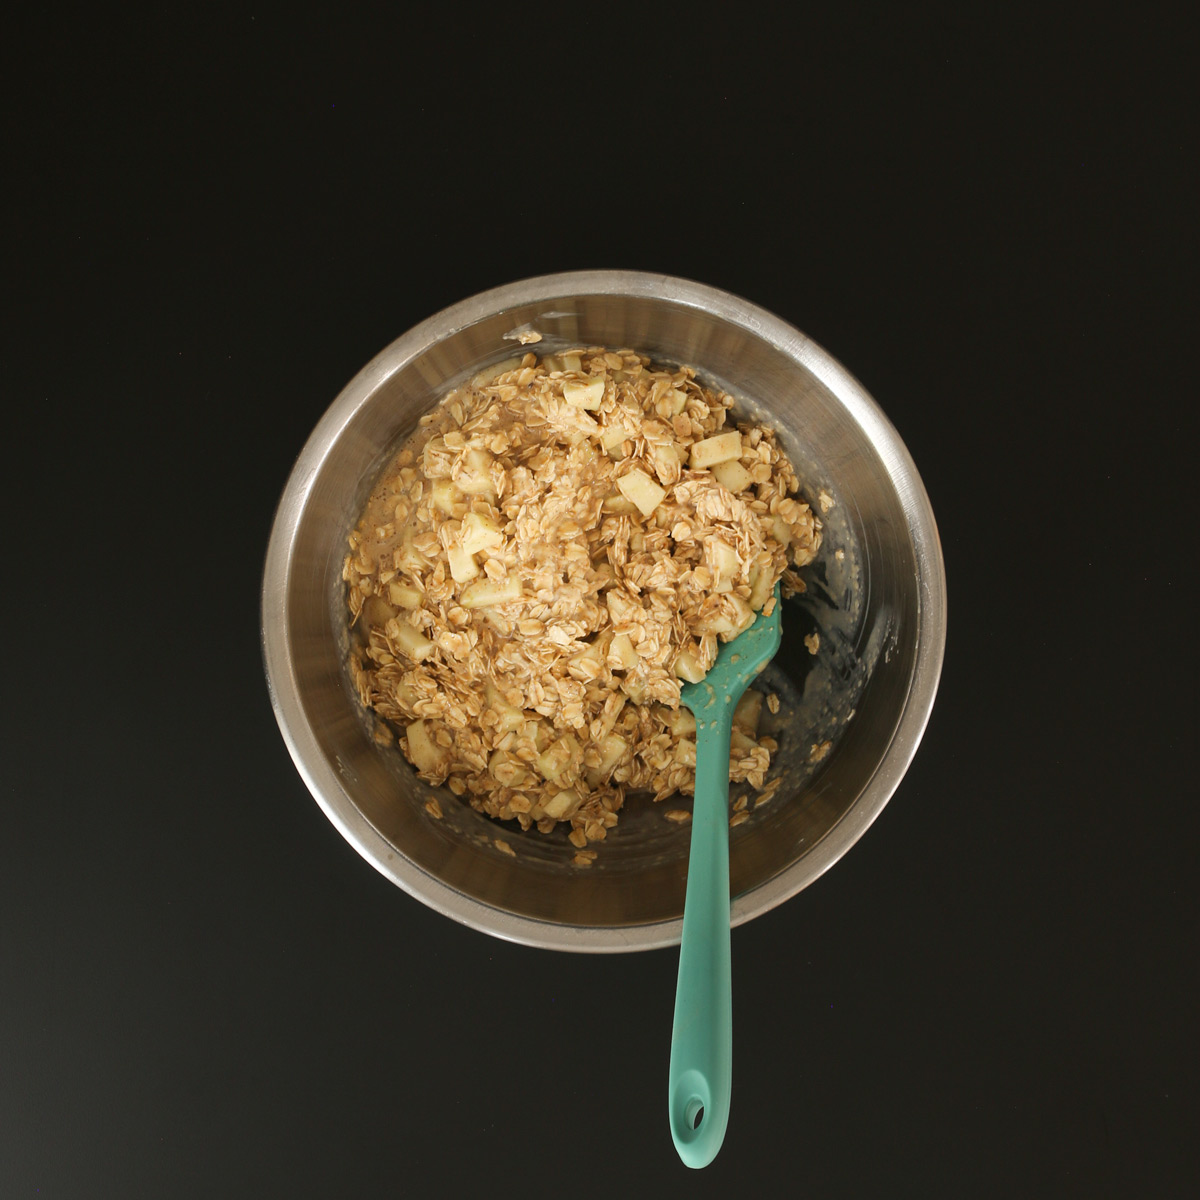 teal rubber spatula submerged in prepared oatmeal batter in mixing bowl on work surface.